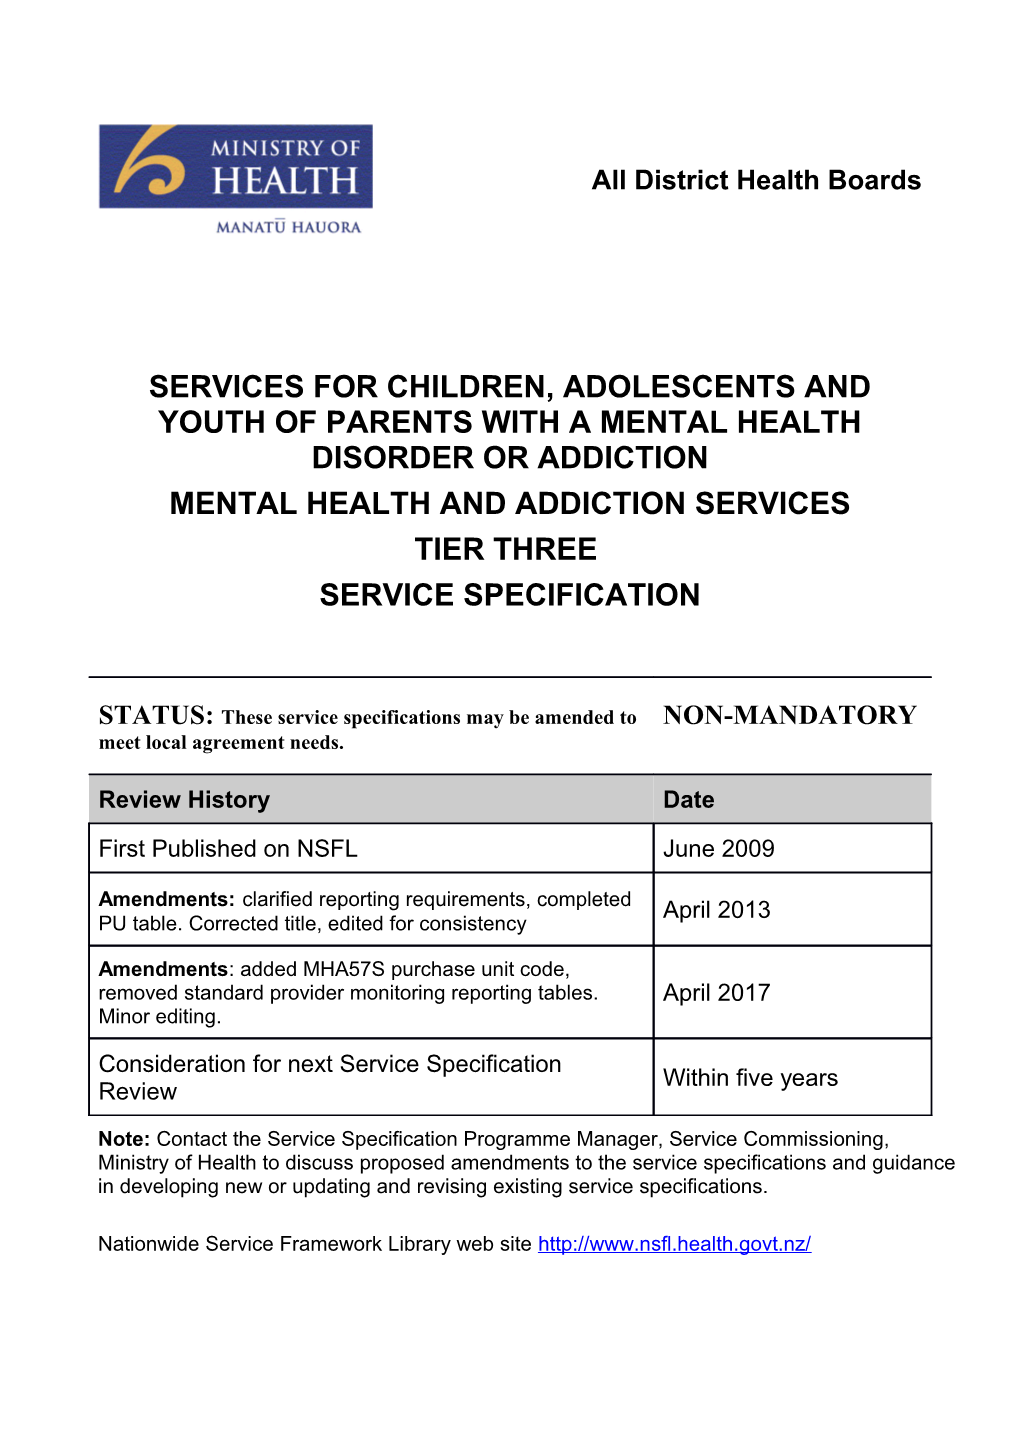 Services for Children, Adolescents and Youth of Parents